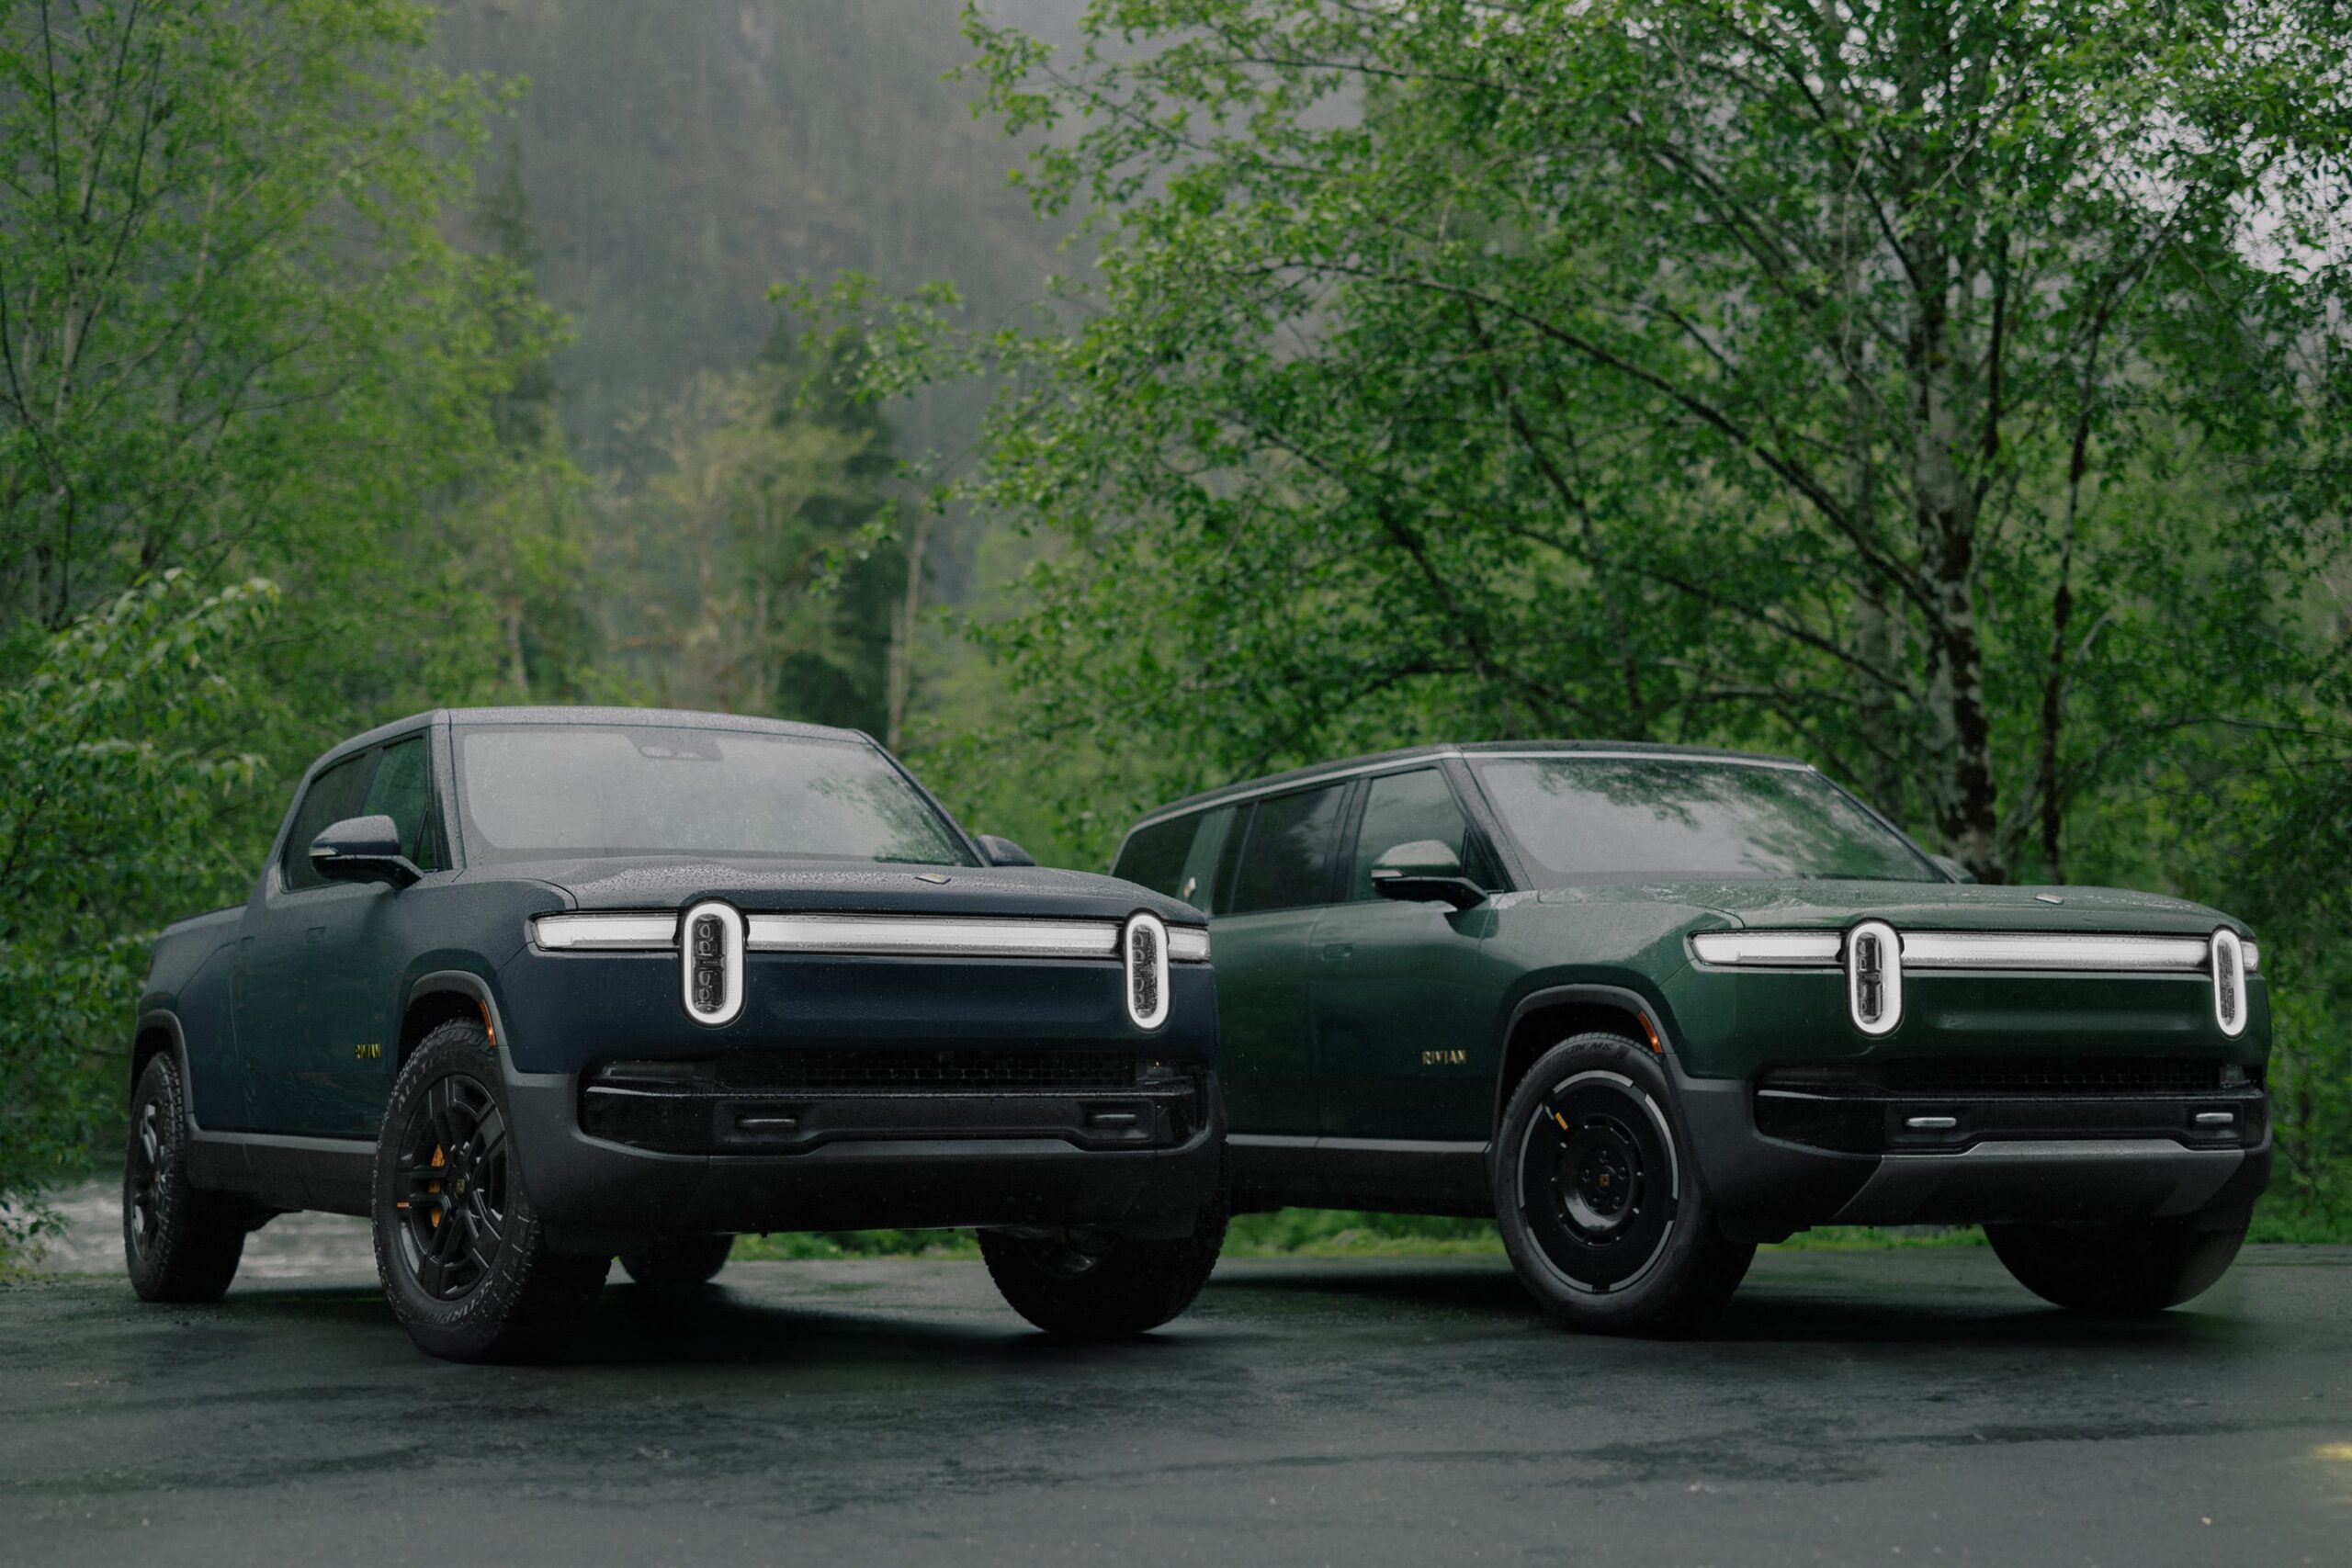 Rivian unveils second-generation R1S and R1T models with enhanced performance, technology, and design. Featuring a new Quad Motor with 1,025 horsepower and advanced autonomy systems.